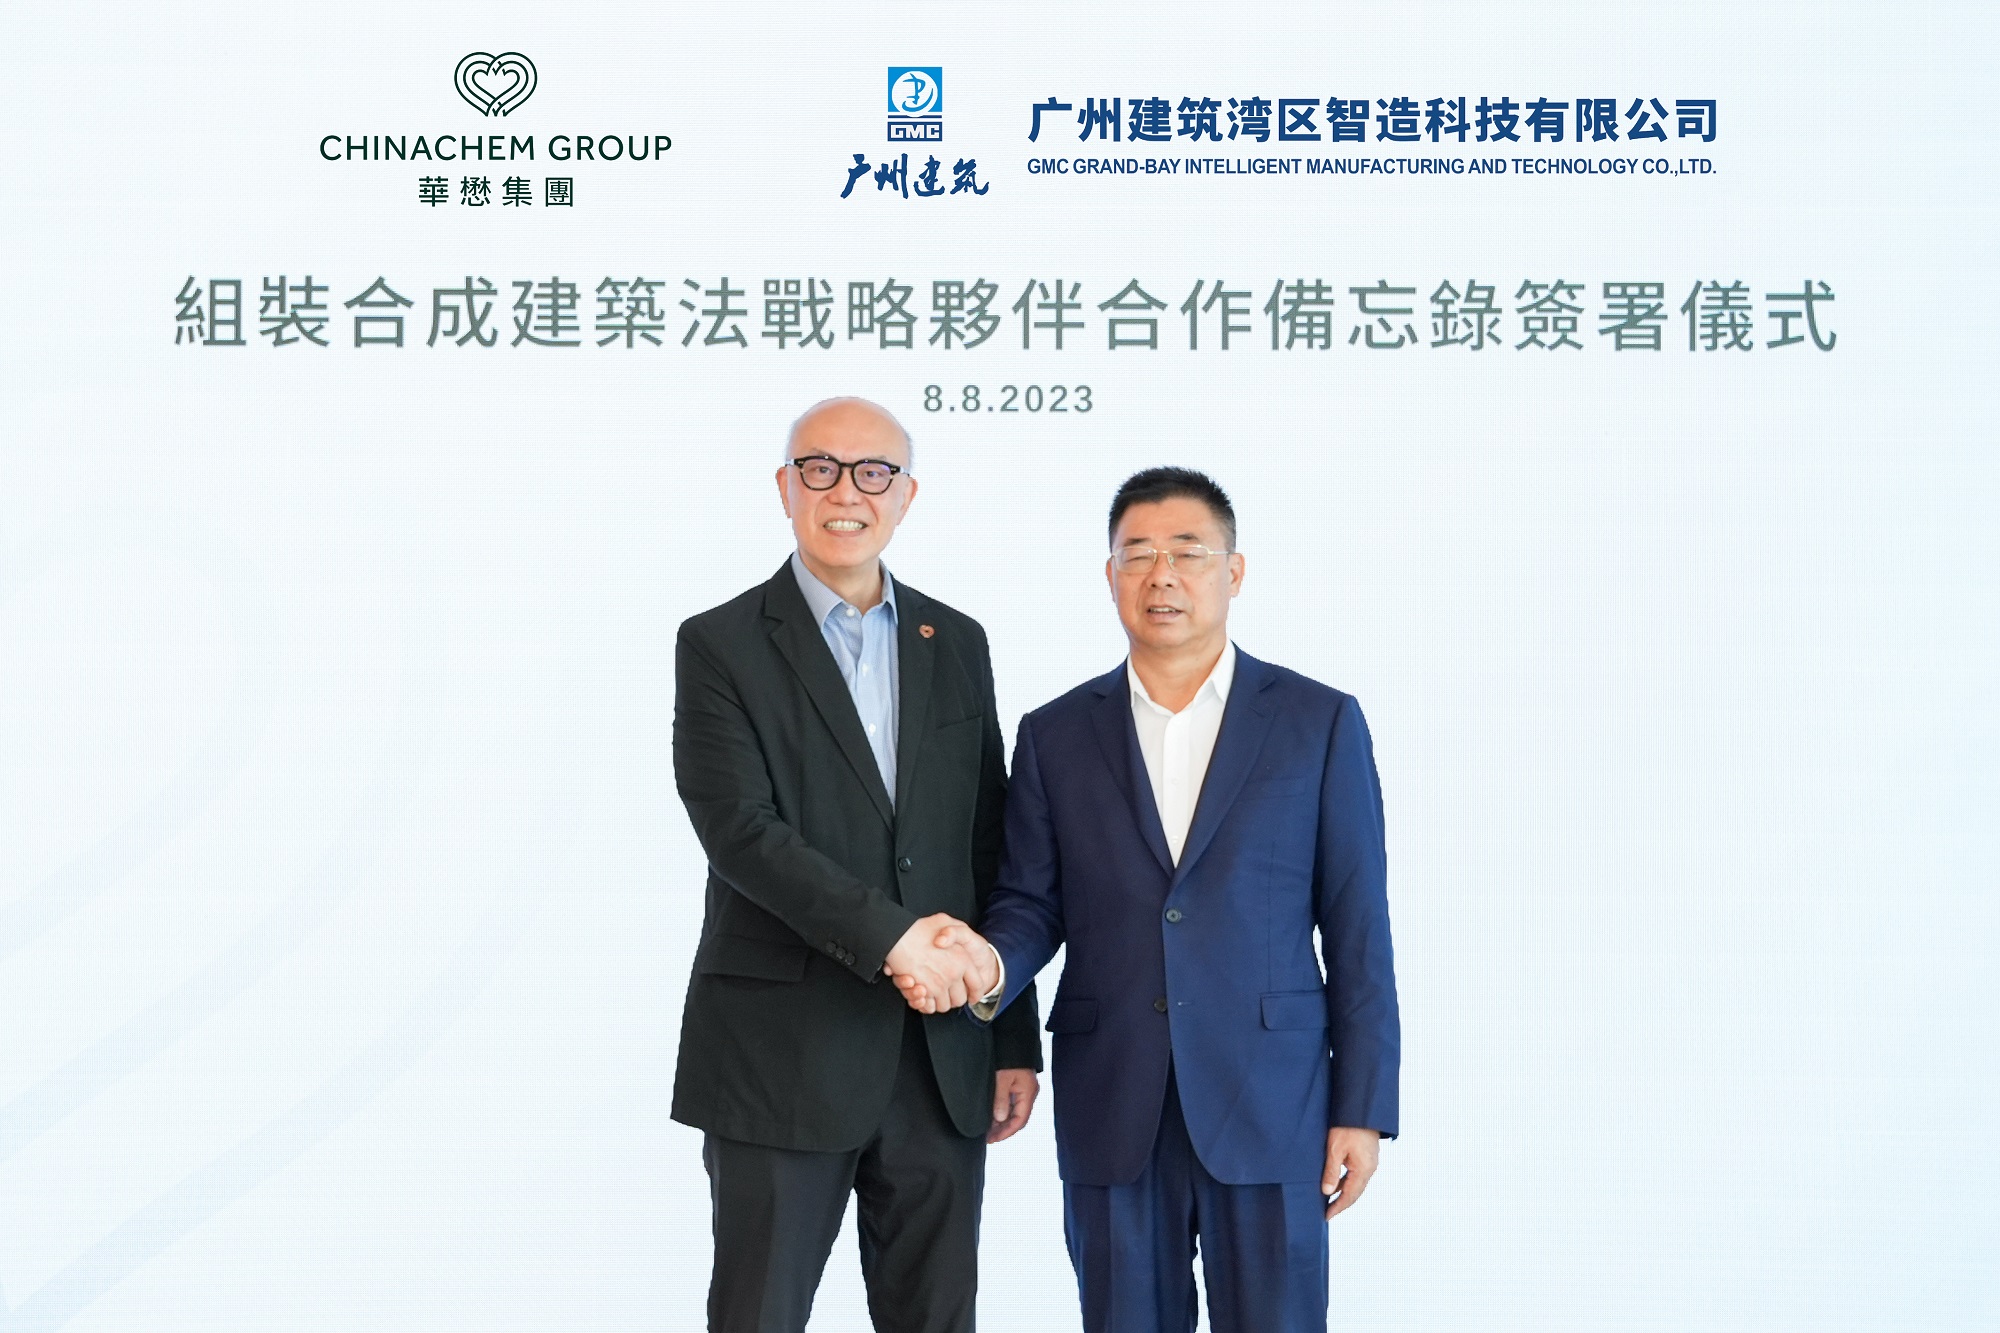 Chinachem Group's Executive Director and CEO, Donald Choi (left), and Chairman of Guangzhou Municipal Construction Group Co., Ltd., Liang Huqing (right), are embarking on a new chapter of strategic partnership in the field of ''Modular Integrated Construction.'' Under this partnership, they will collaborate to explore, study, and apply this new construction technology.